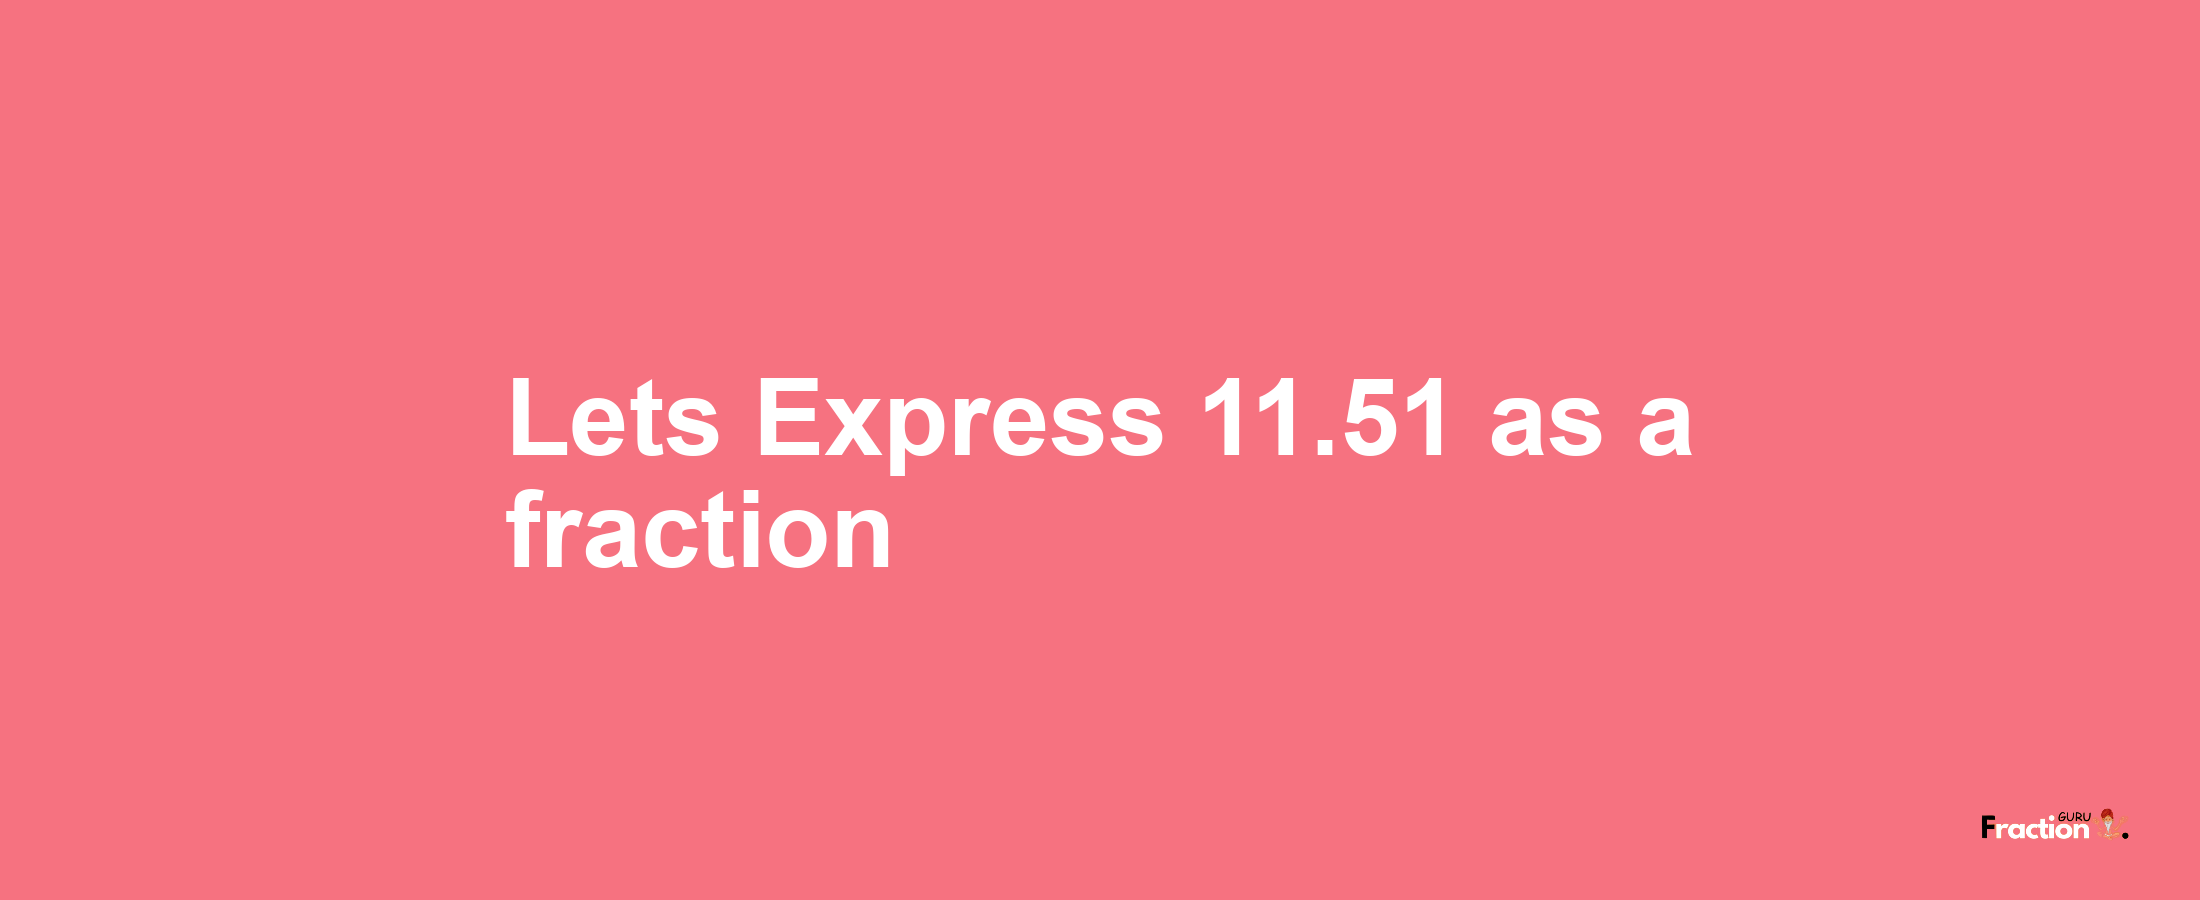 Lets Express 11.51 as afraction